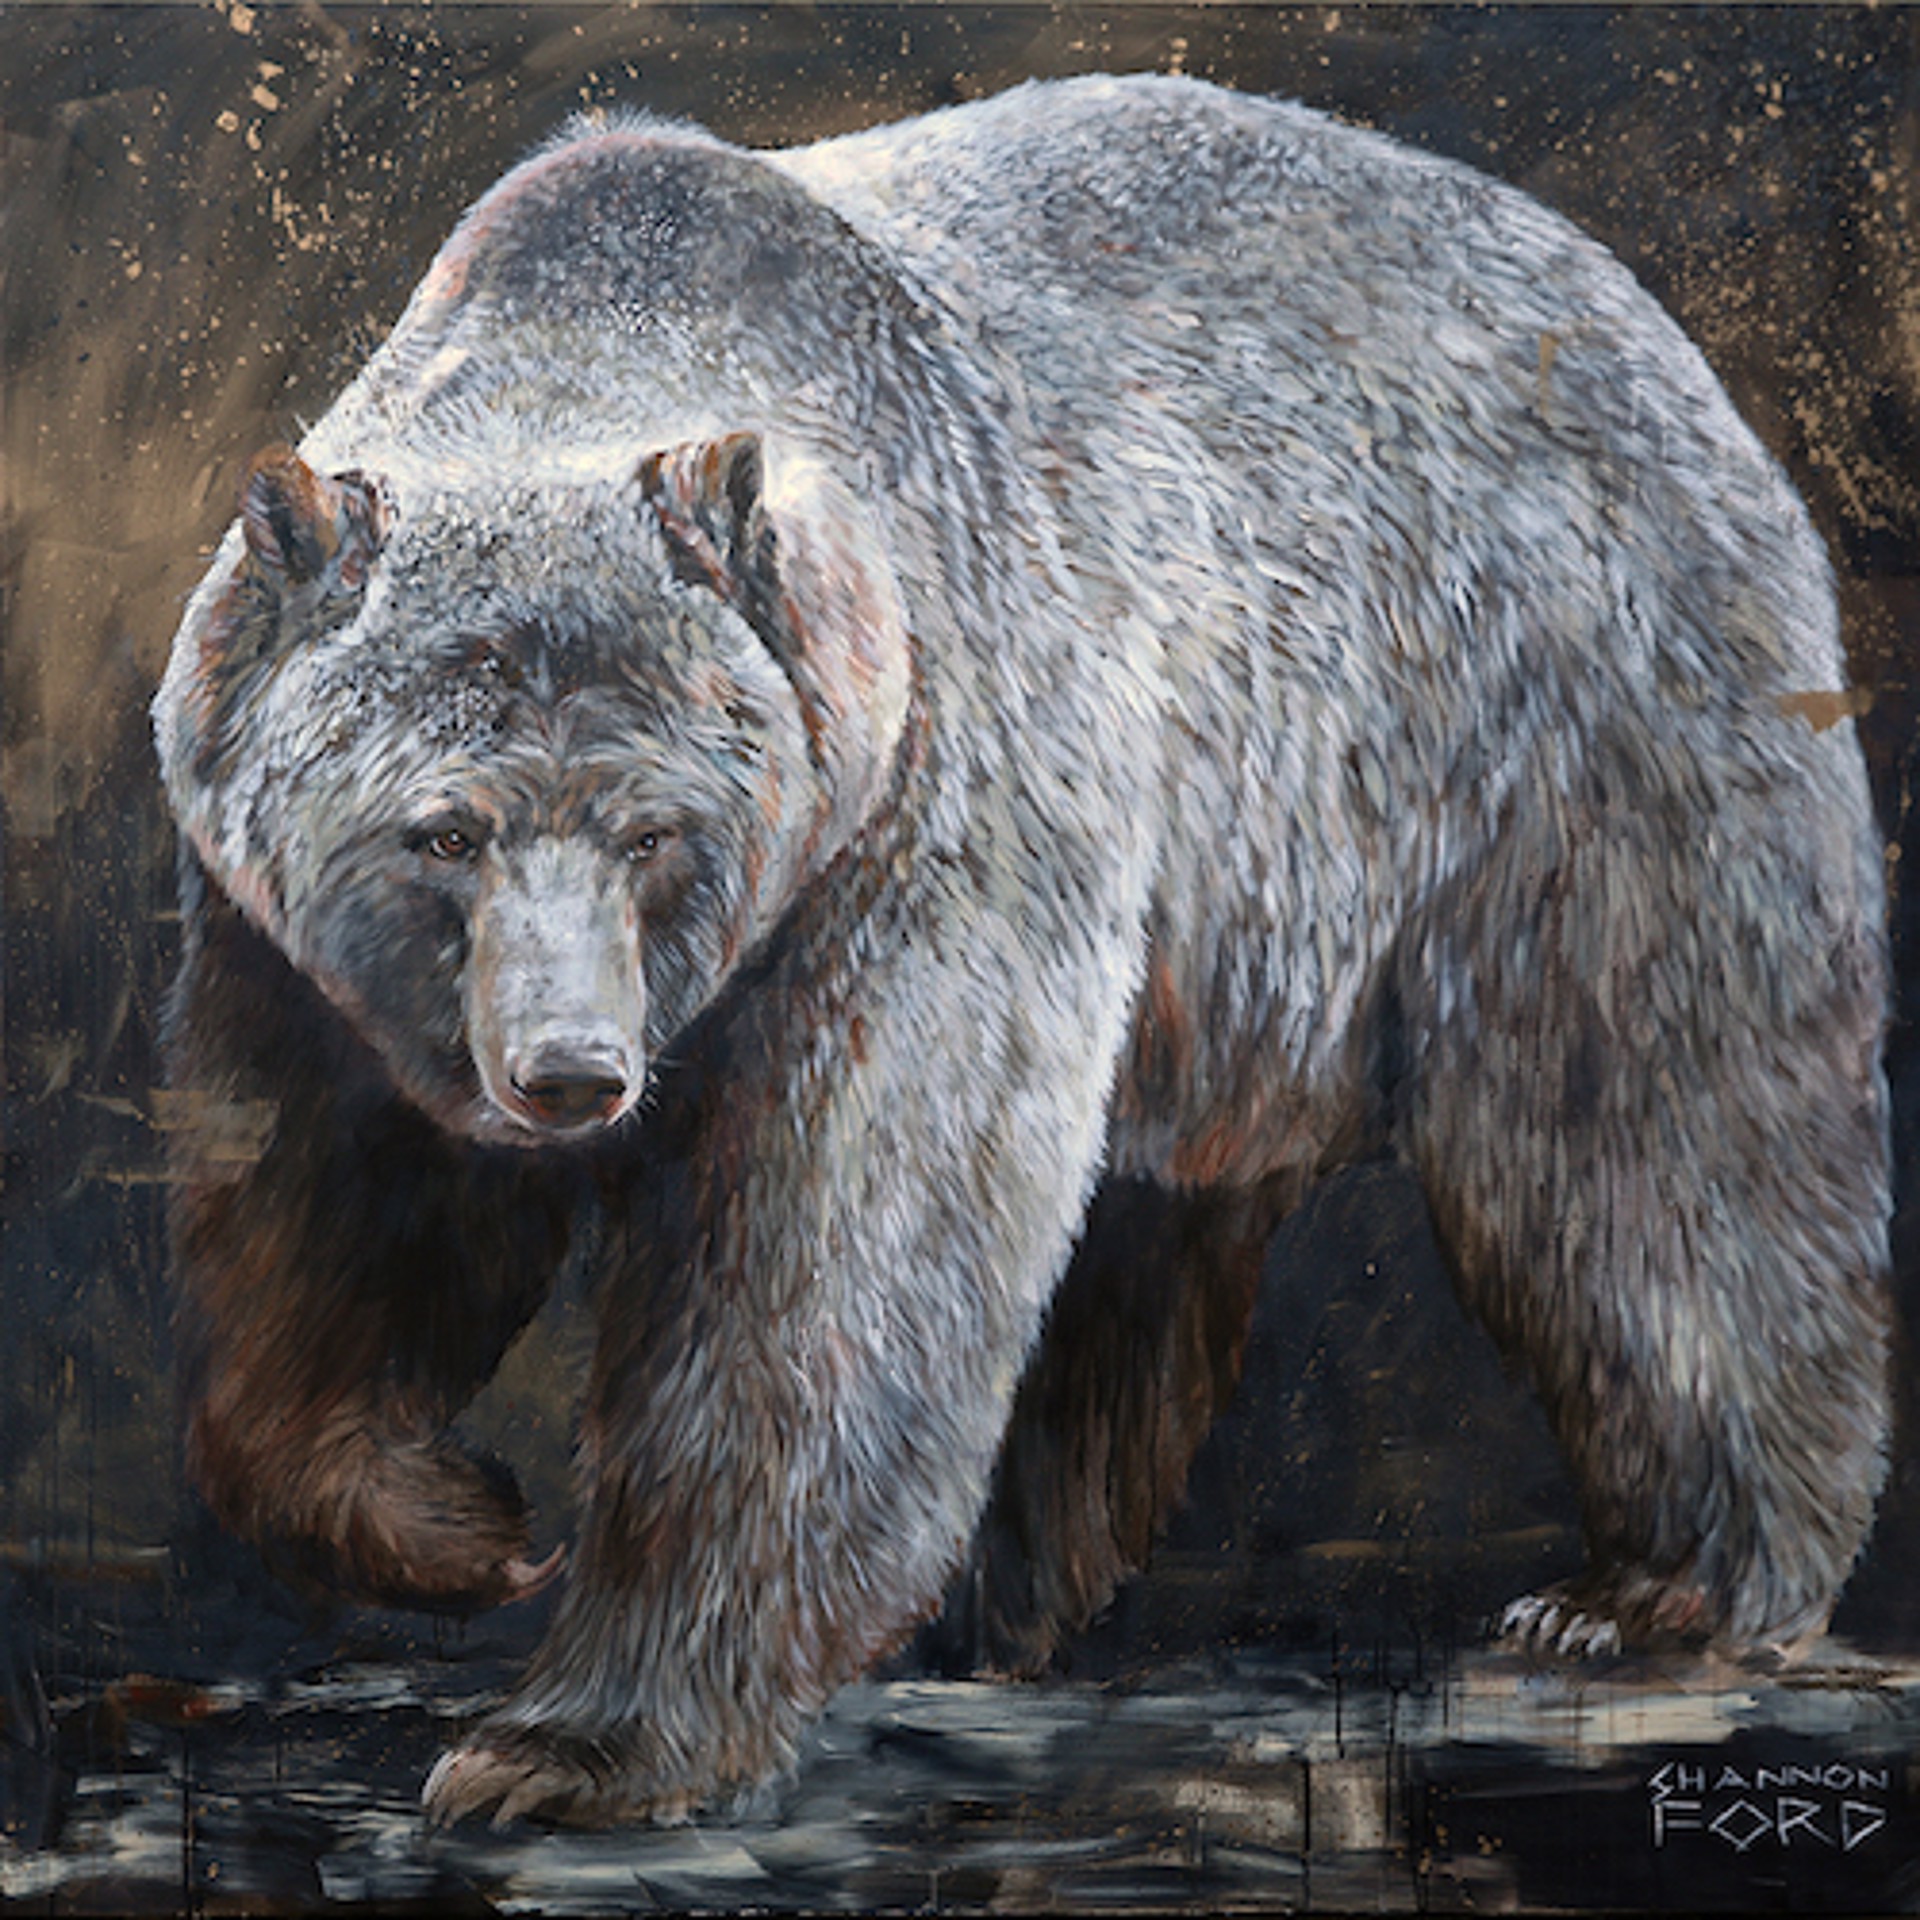 Bear in Mind by Shannon Ford